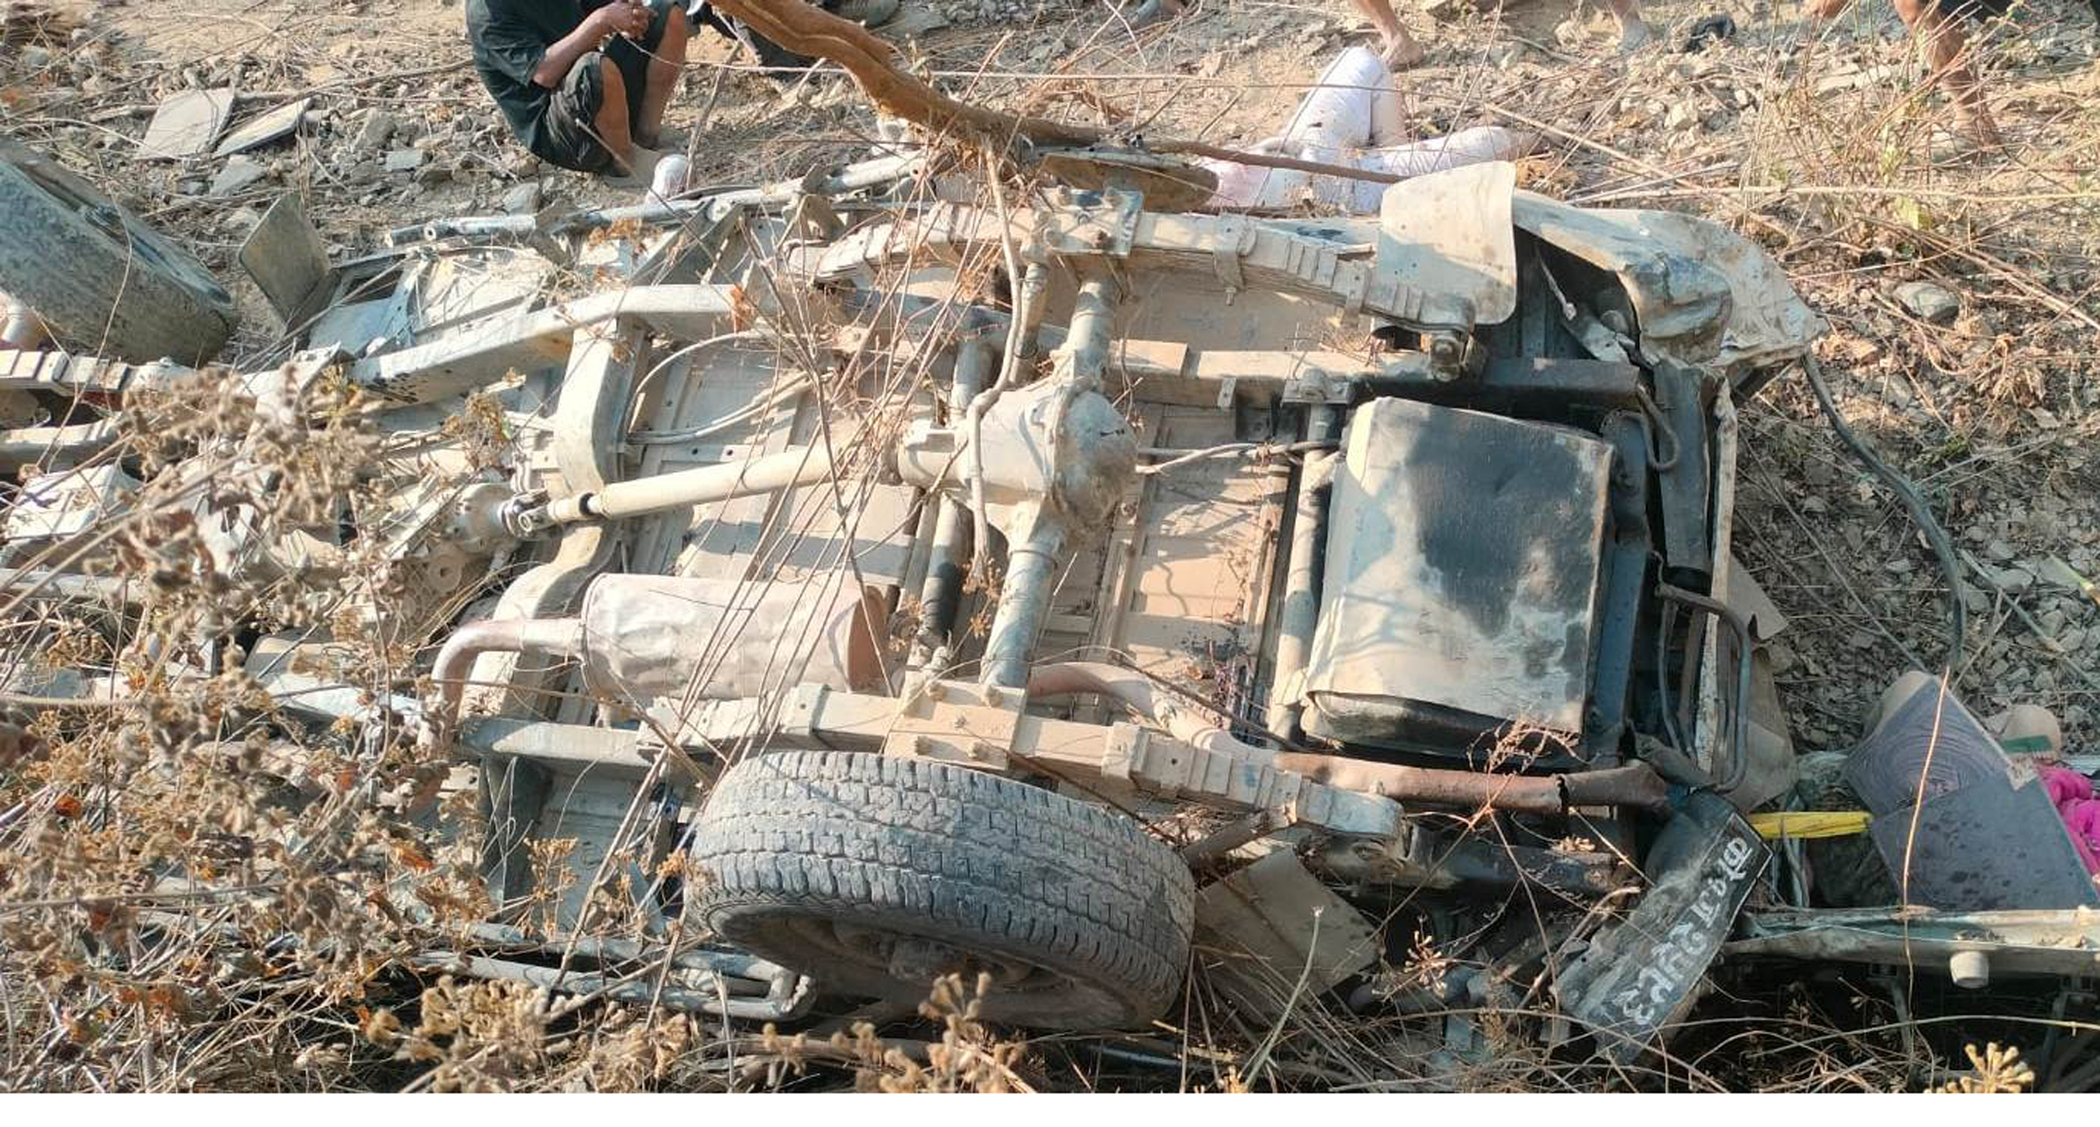 Jeep accident update: Death toll reaches seven